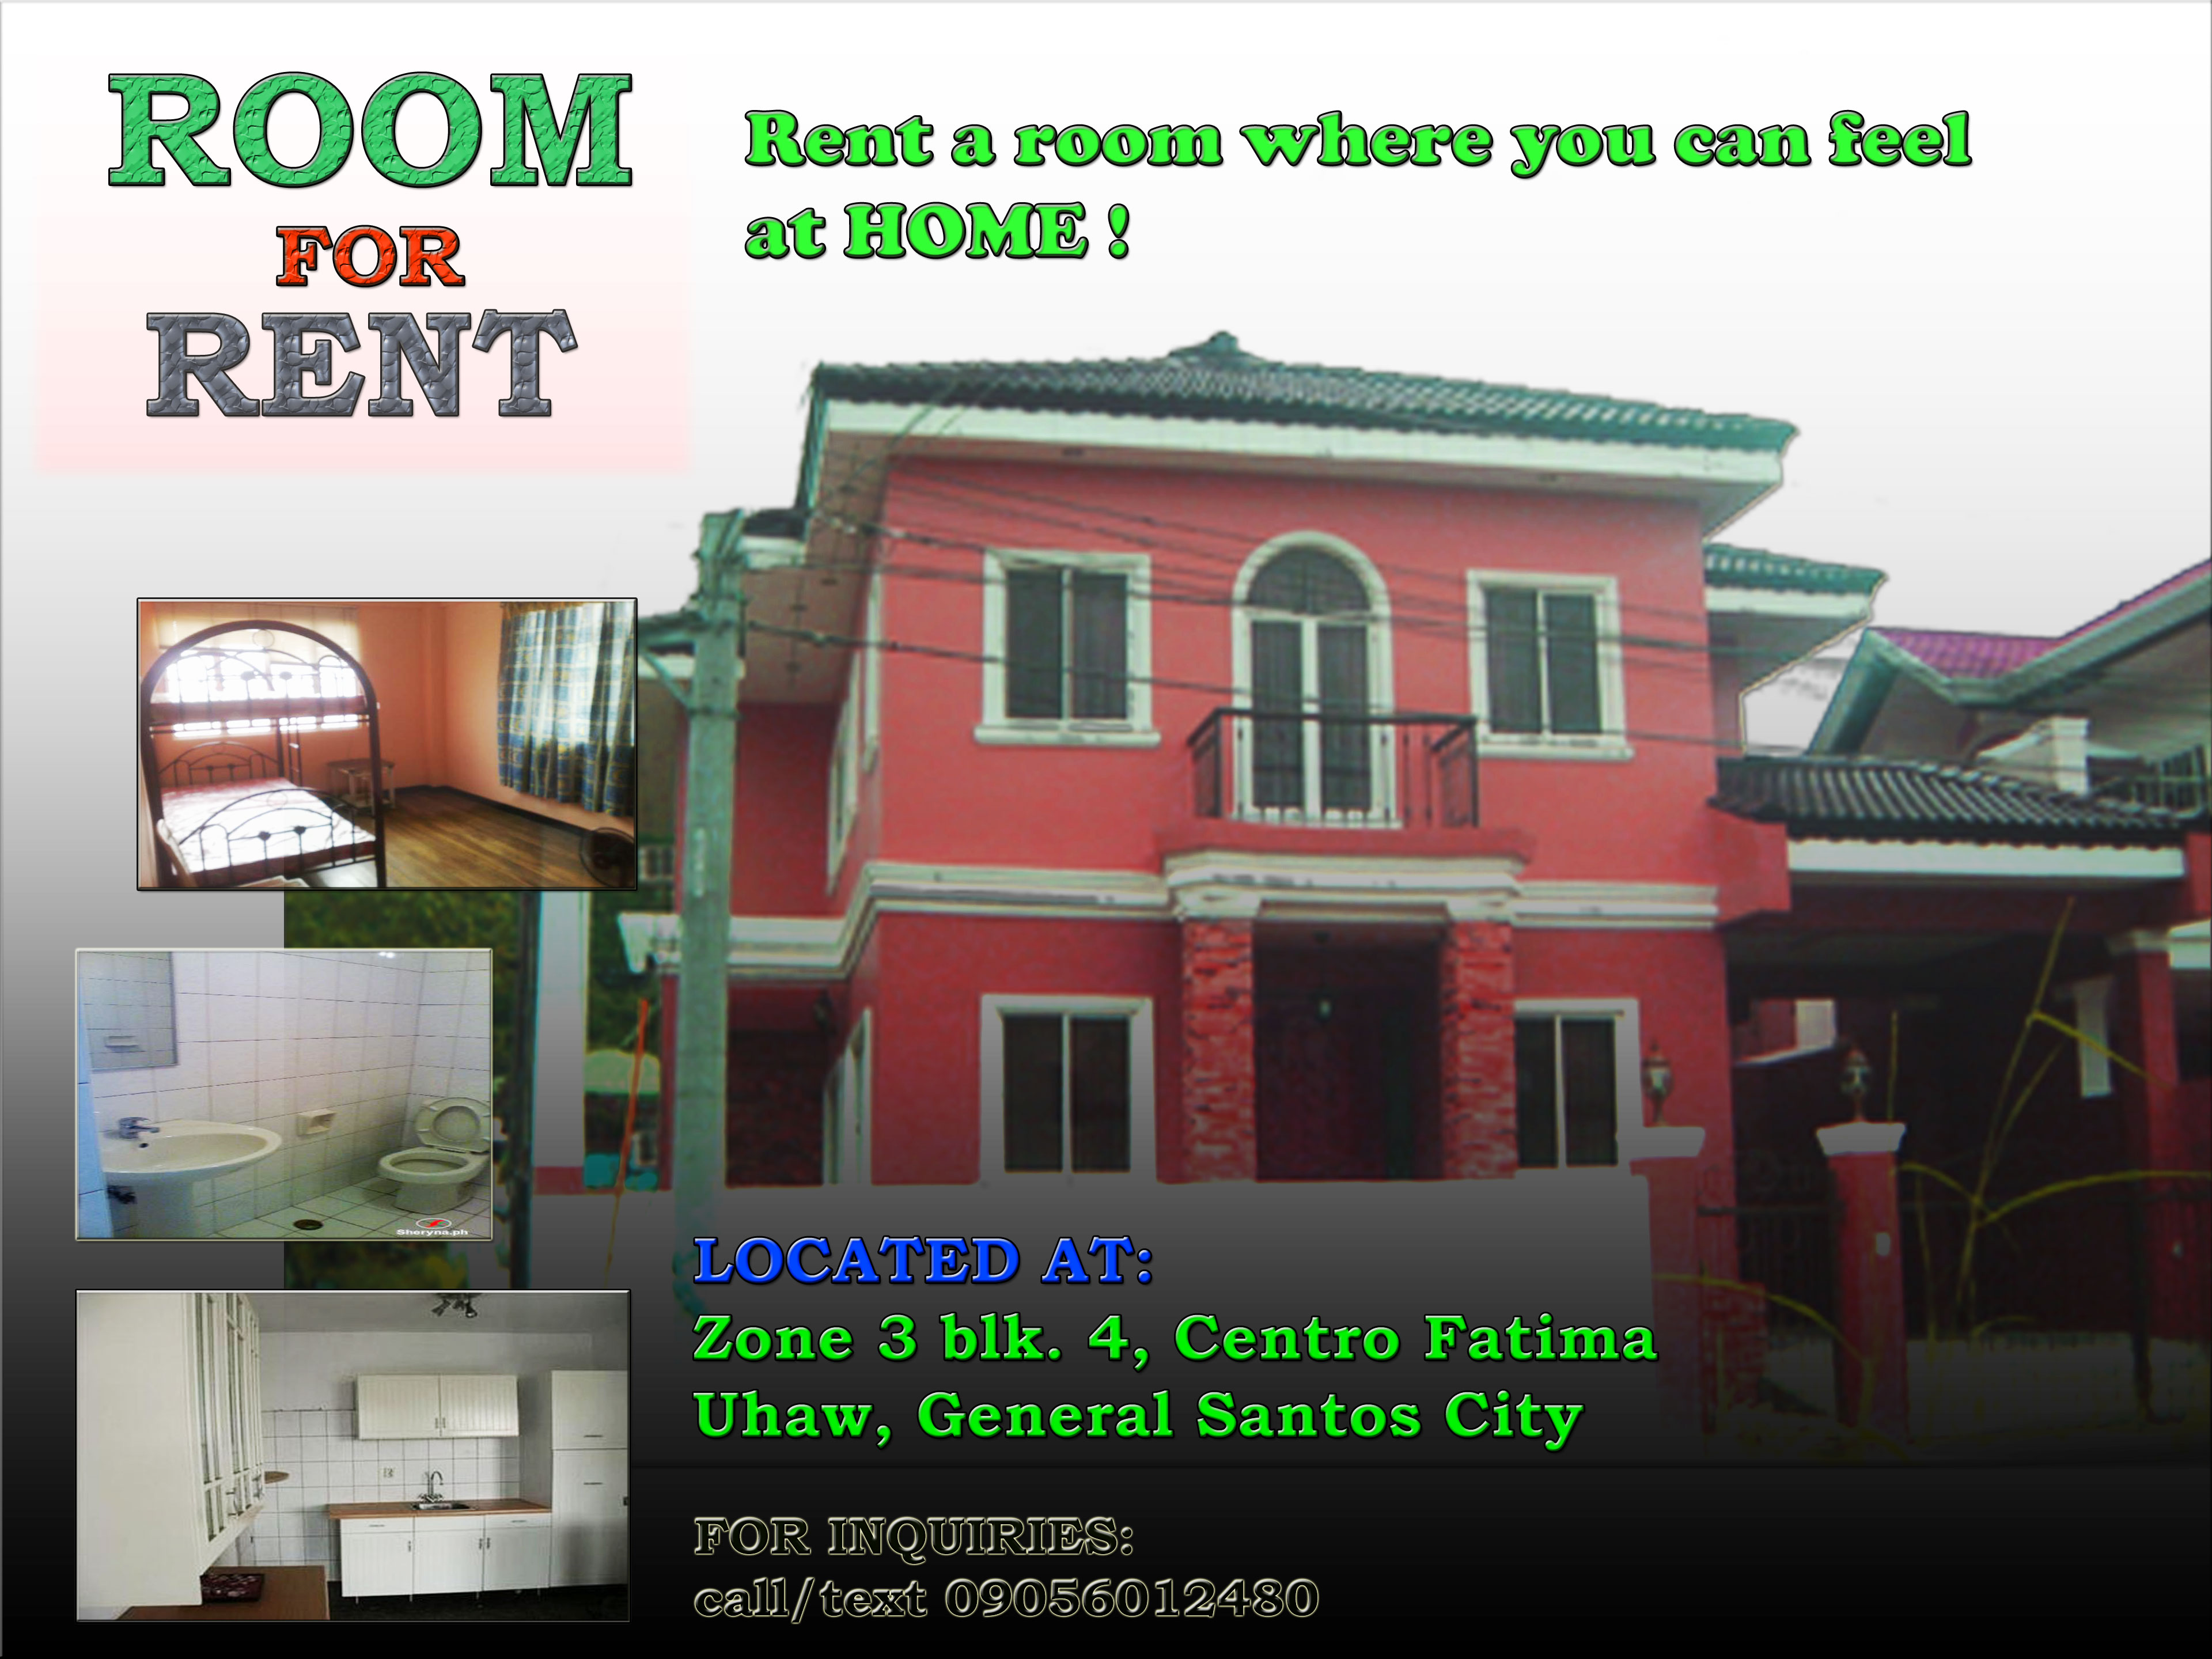 Rooms For Rent Ads Templates